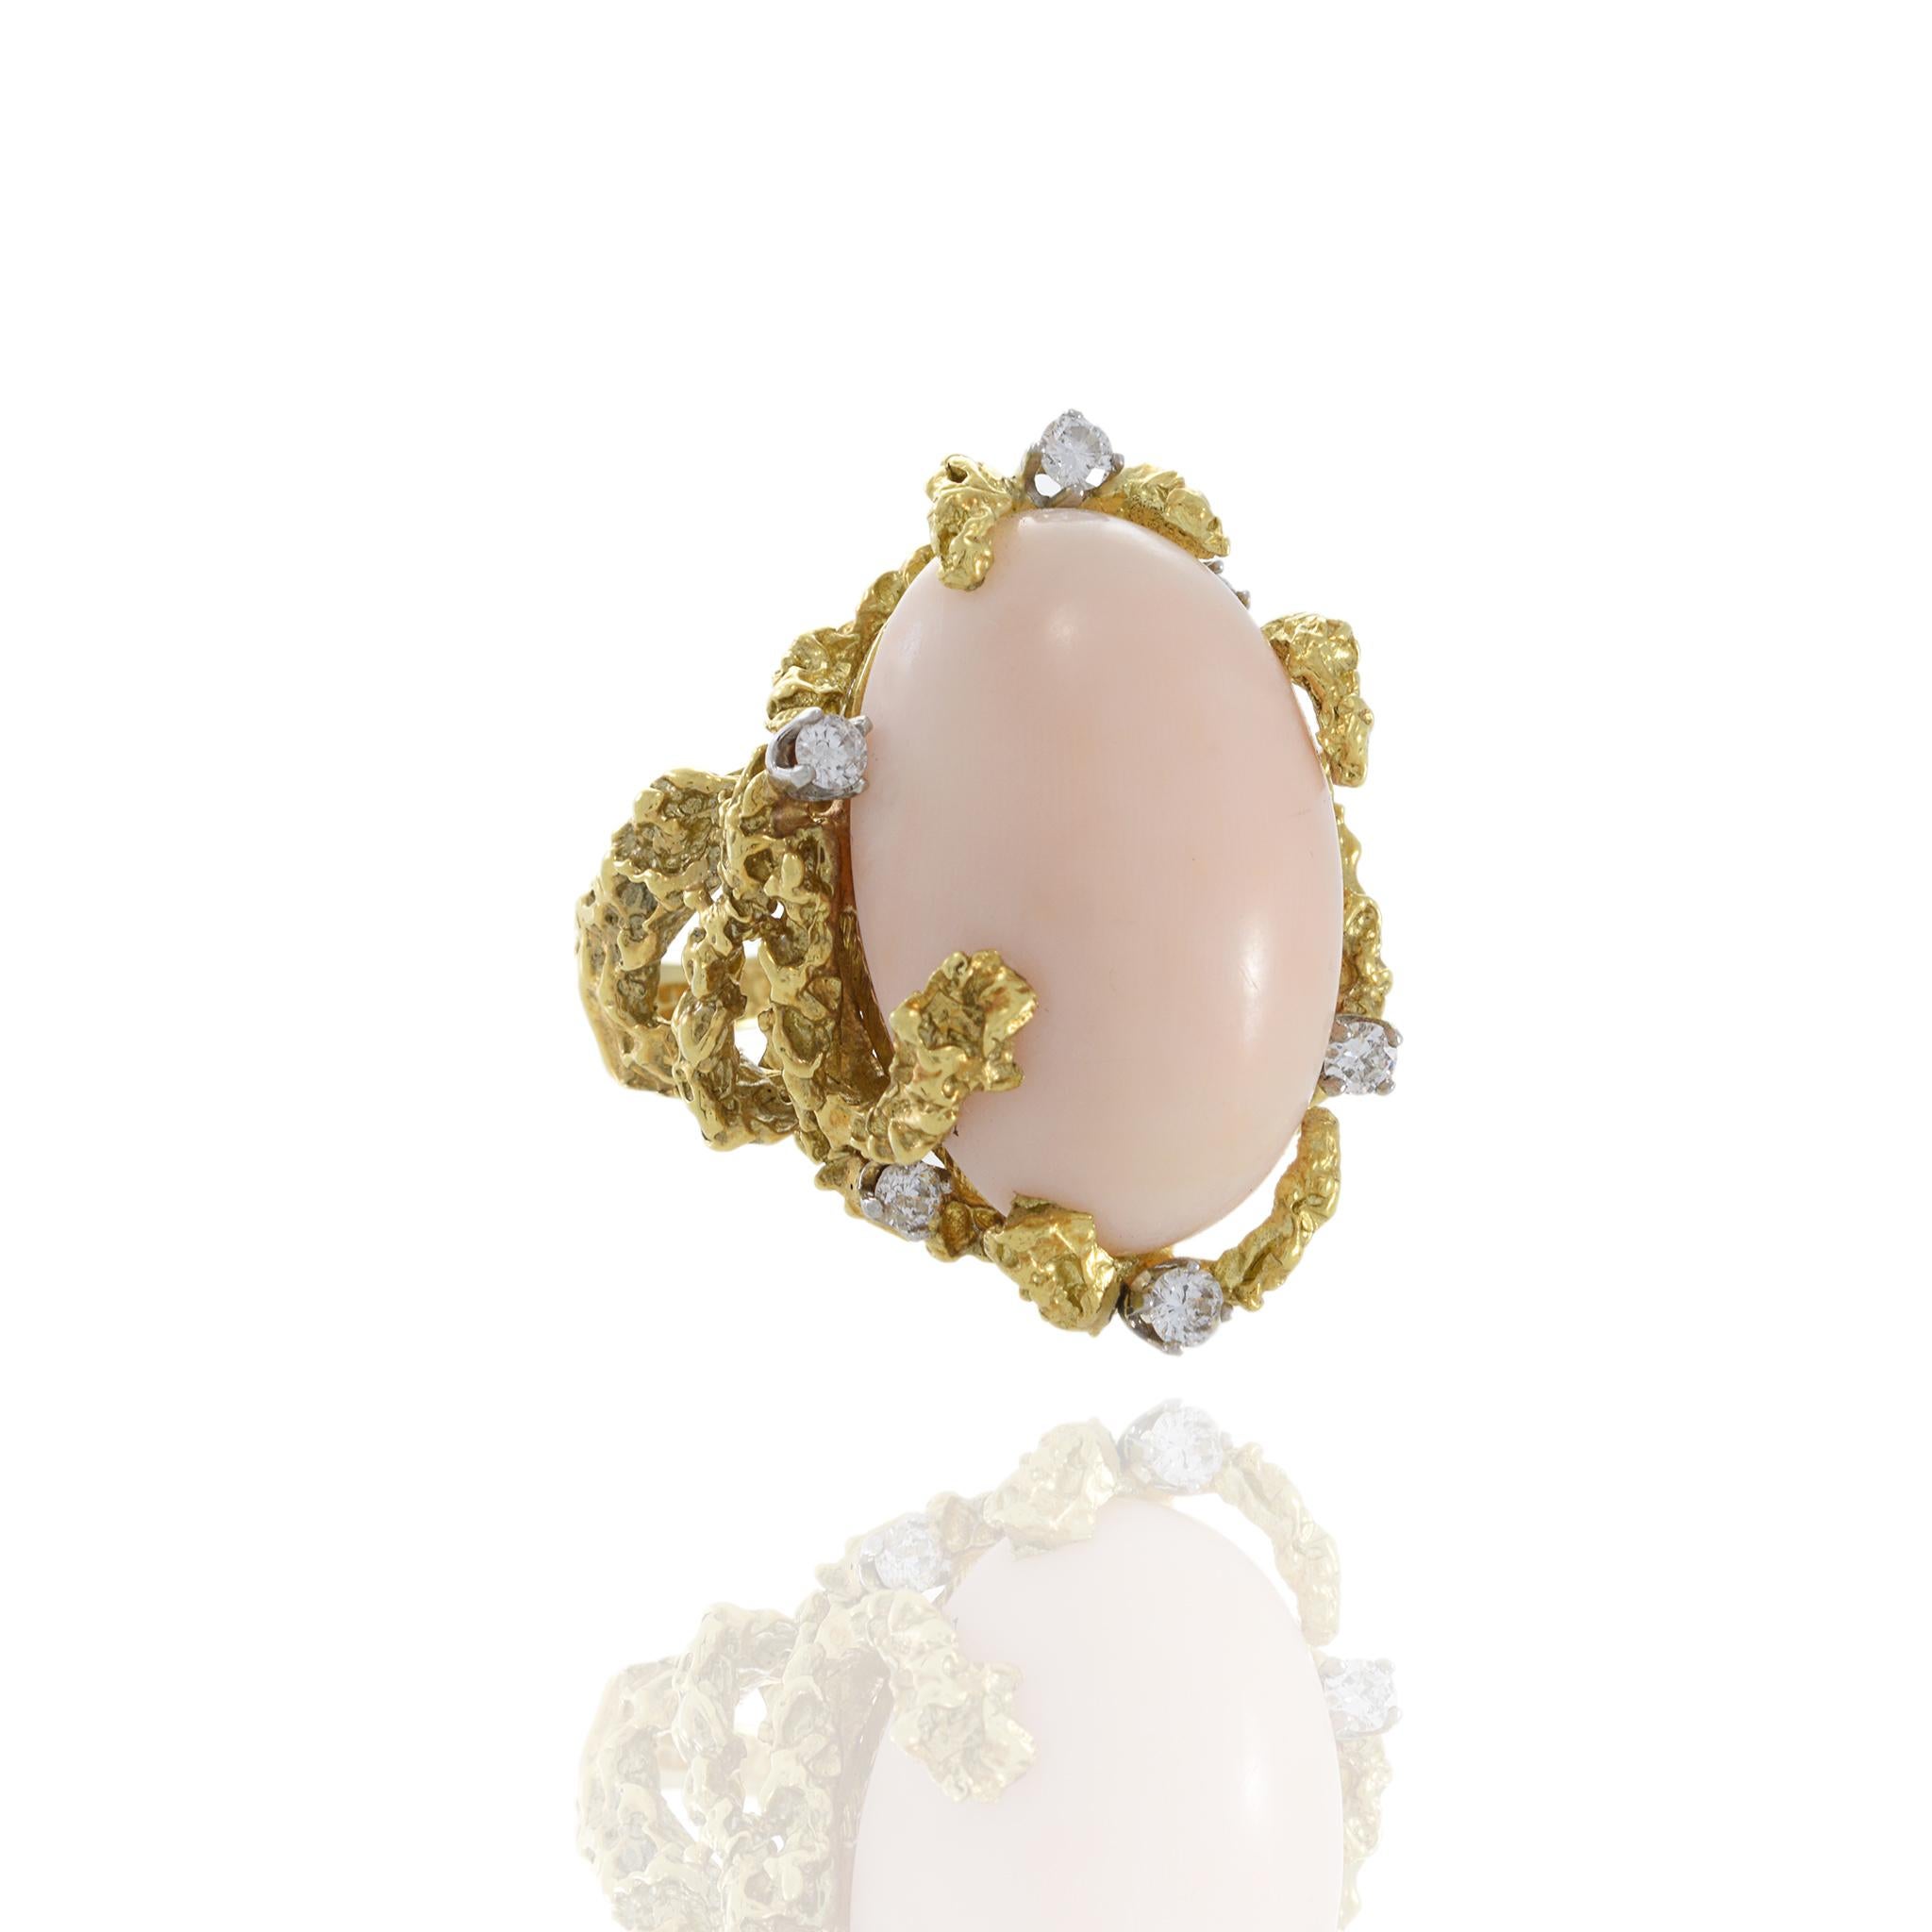 The 18KT Yellow Gold Retro Era Natural Angel Skin Coral and Diamond Cocktail Ring is a testament to the elegance and glamour of vintage jewelry design. This exceptional piece beautifully combines the soft, ethereal beauty of natural angel skin coral